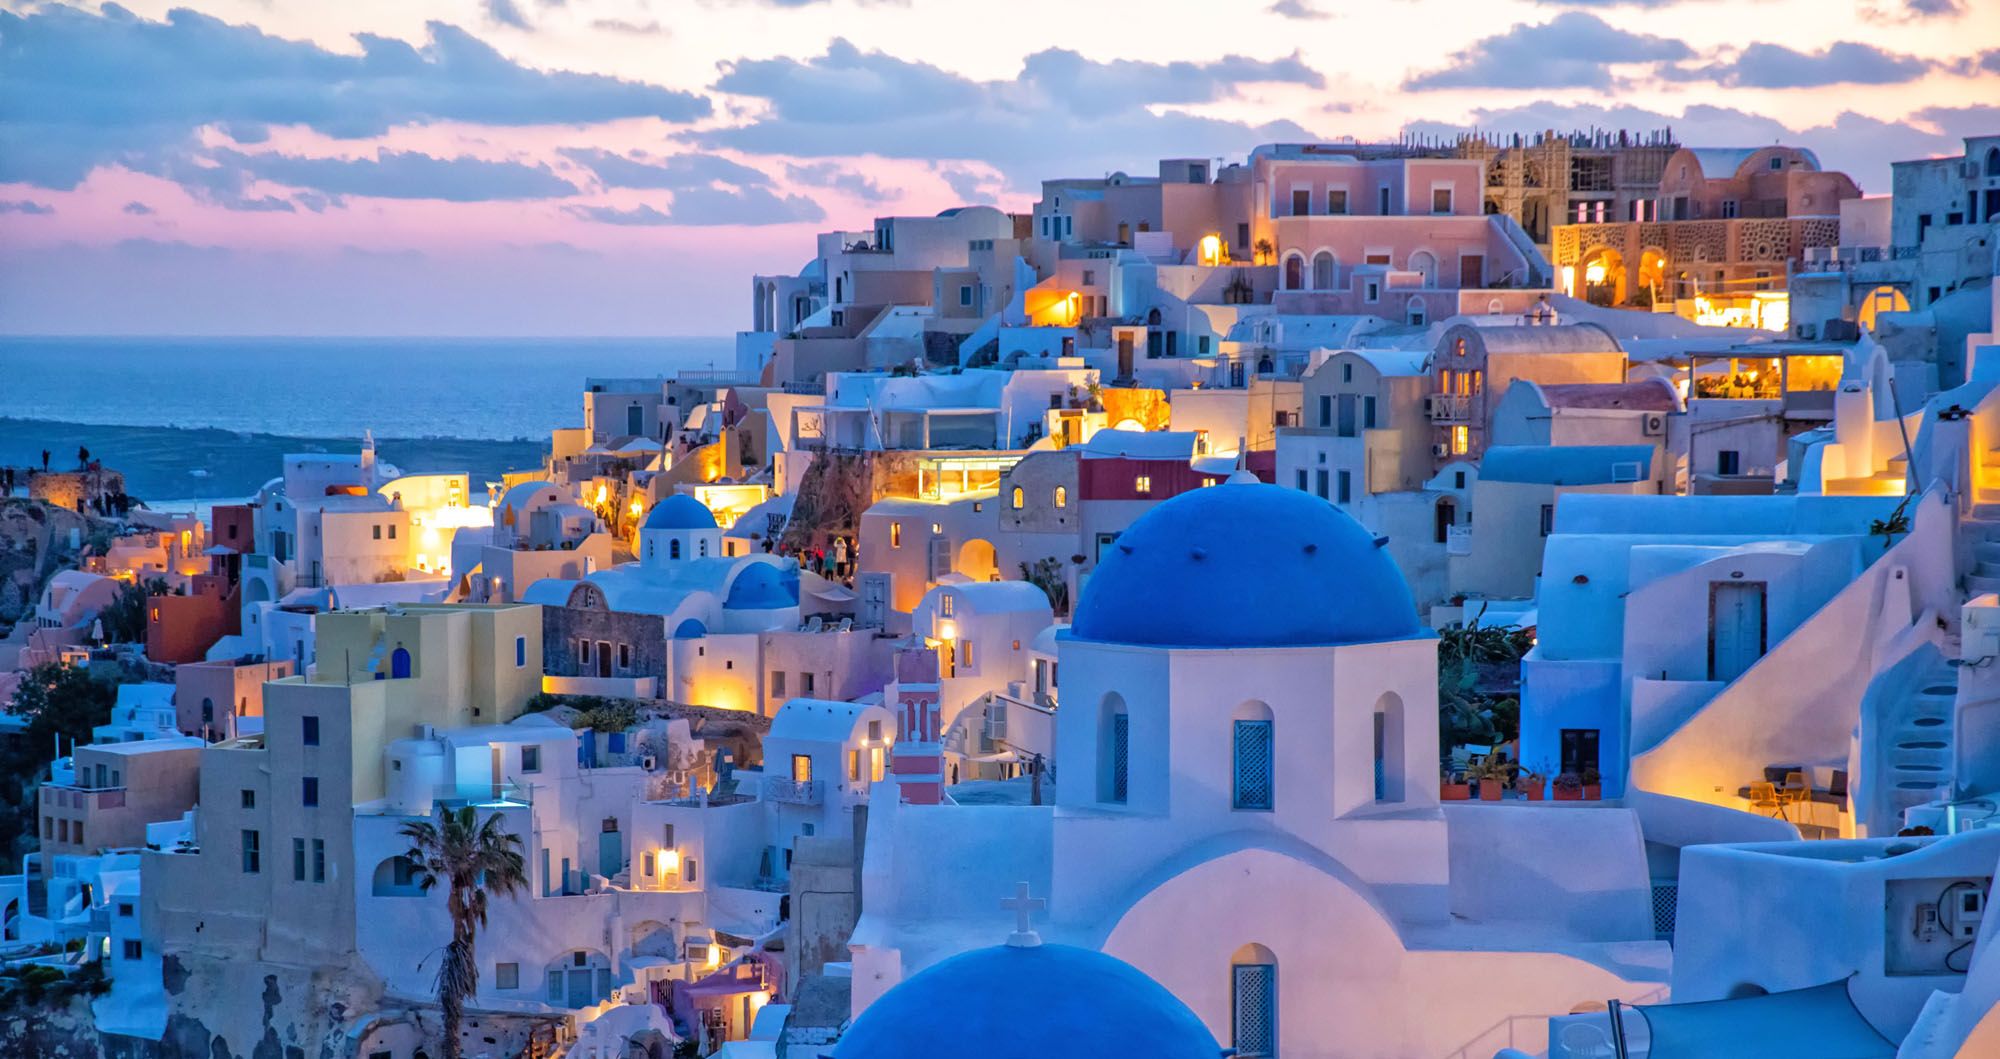 Two Amazing Spots To Watch The Sunset In Oia Santorini Earth